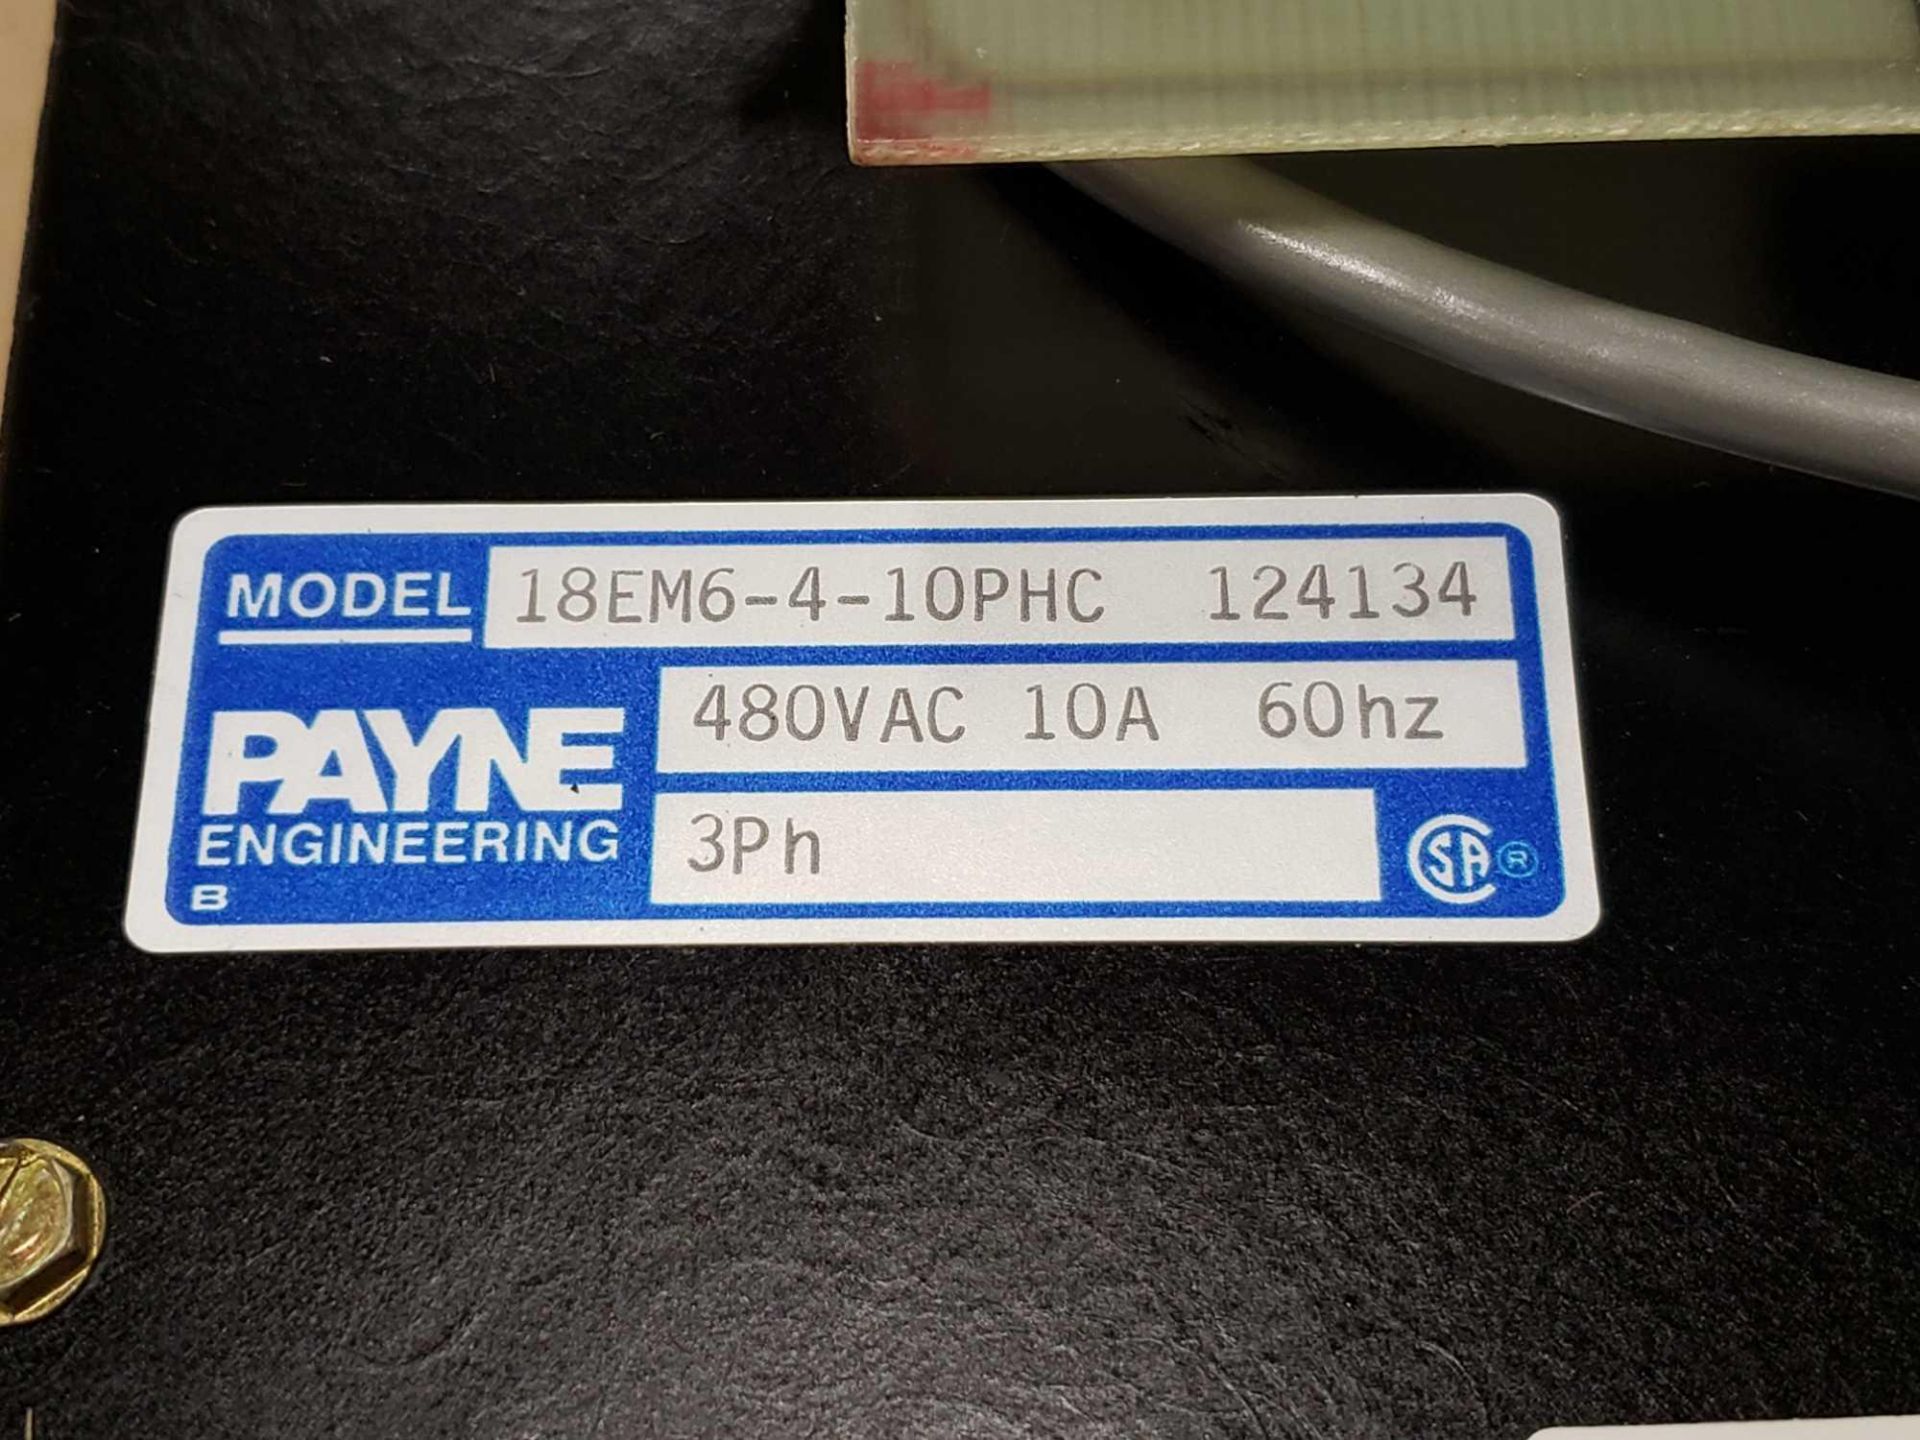 Payne Engineering power control model 18EM6-4-10PHC. 3 phase 480vac, 10amp, 60hz. New in plastic. - Image 2 of 2